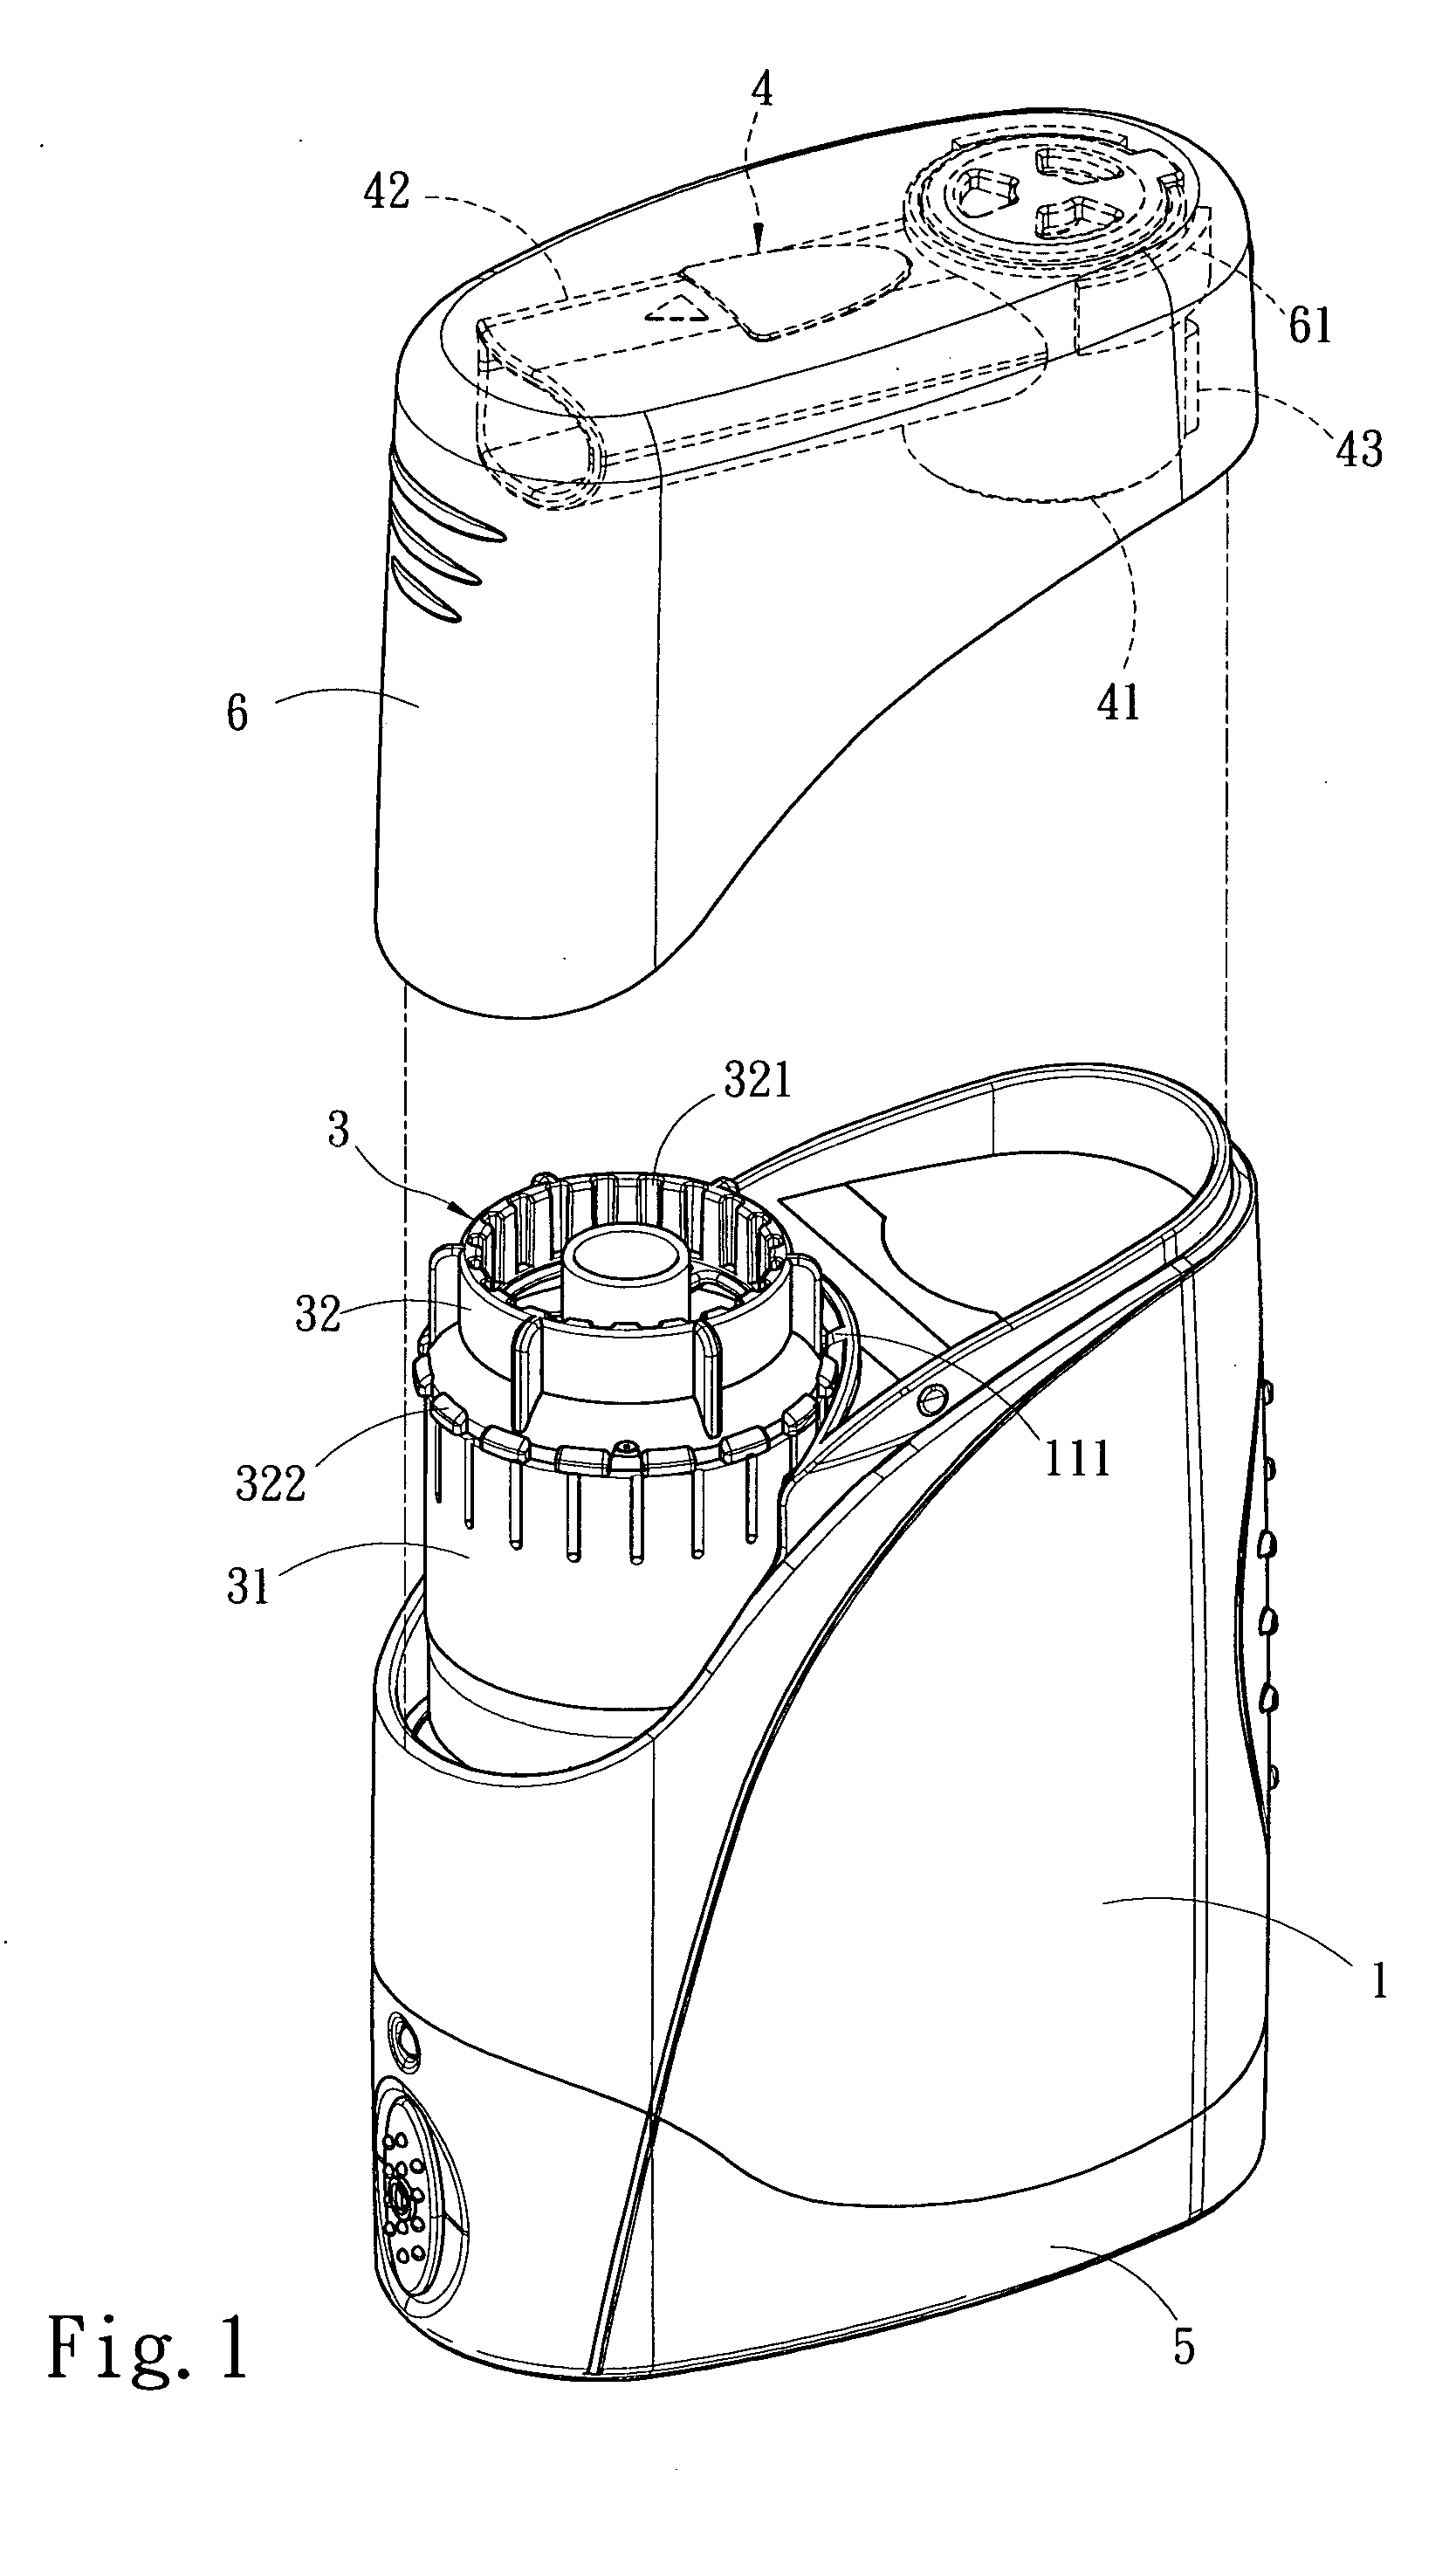 Nebulizing apparatus for medical use with improved nozzle positioning structure